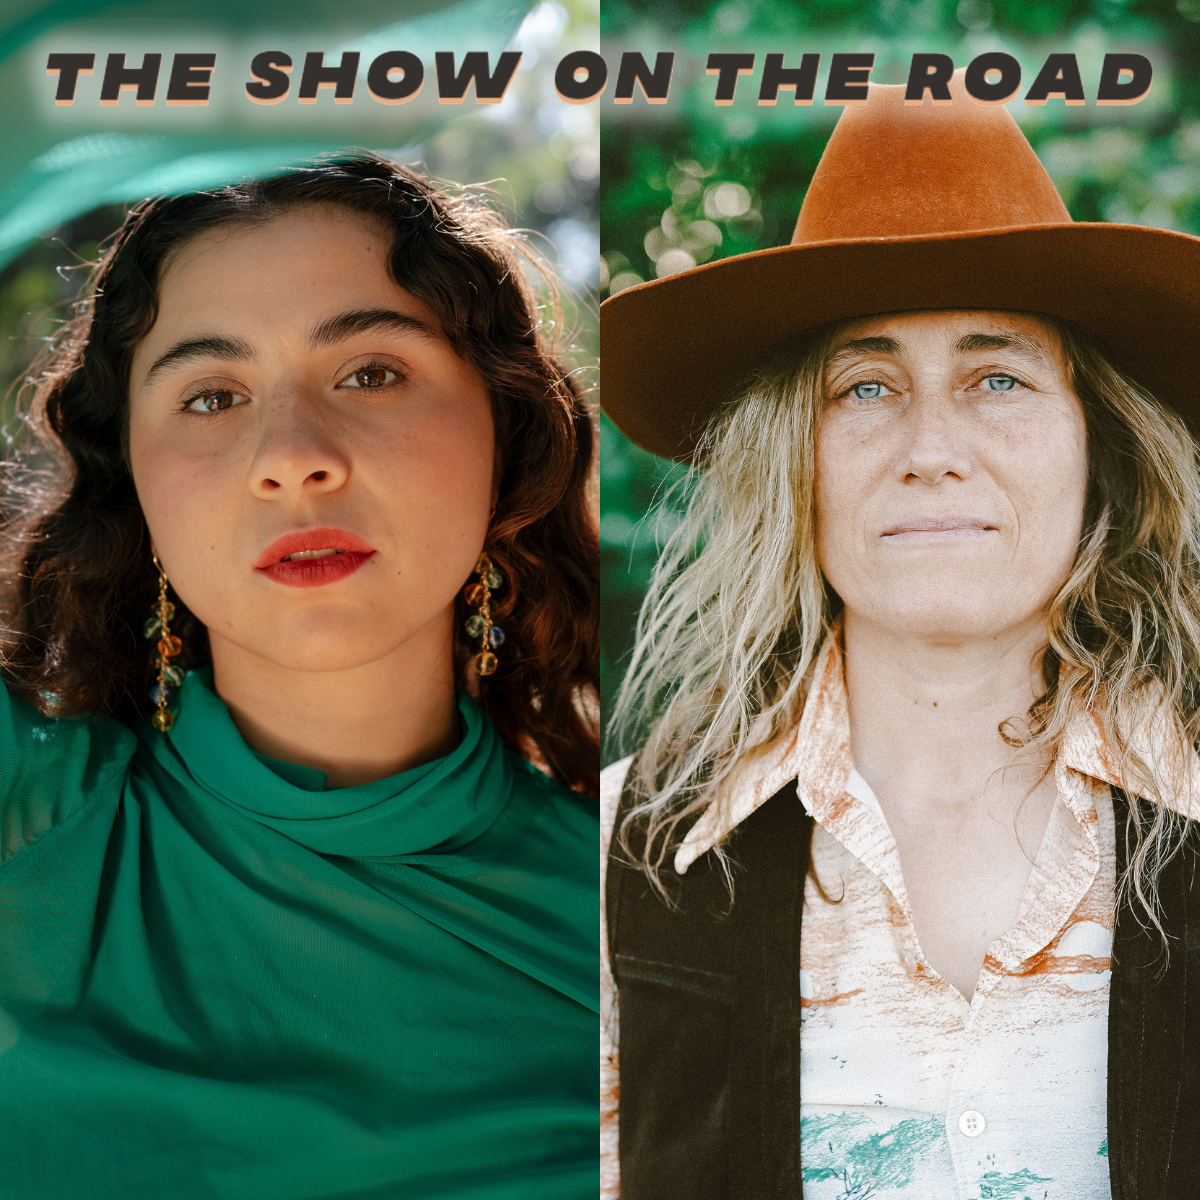 The Show On The Road - Jordie Lane and Clare Reynolds